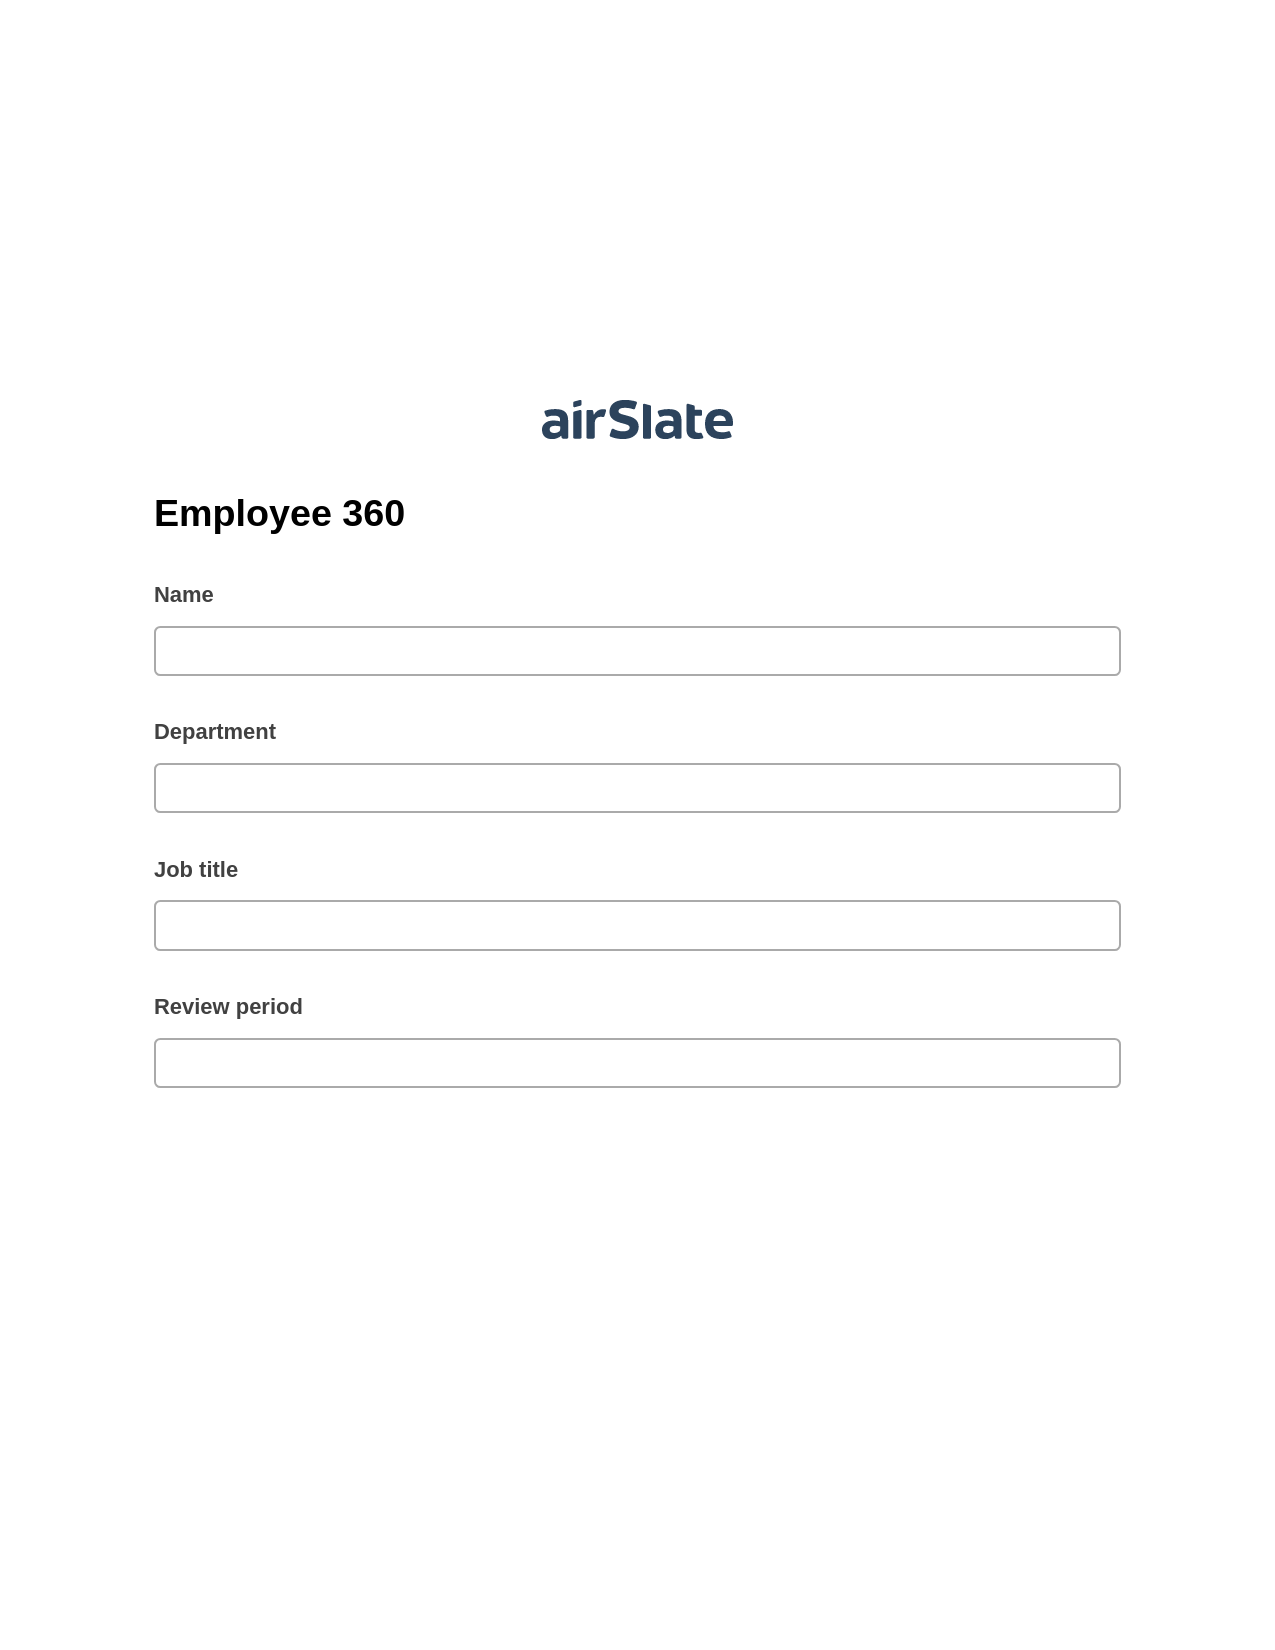 Employee 360 Pre-fill from MS Dynamics 365 Records, Update MS Dynamics 365 Record Bot, Post-finish Document Bot